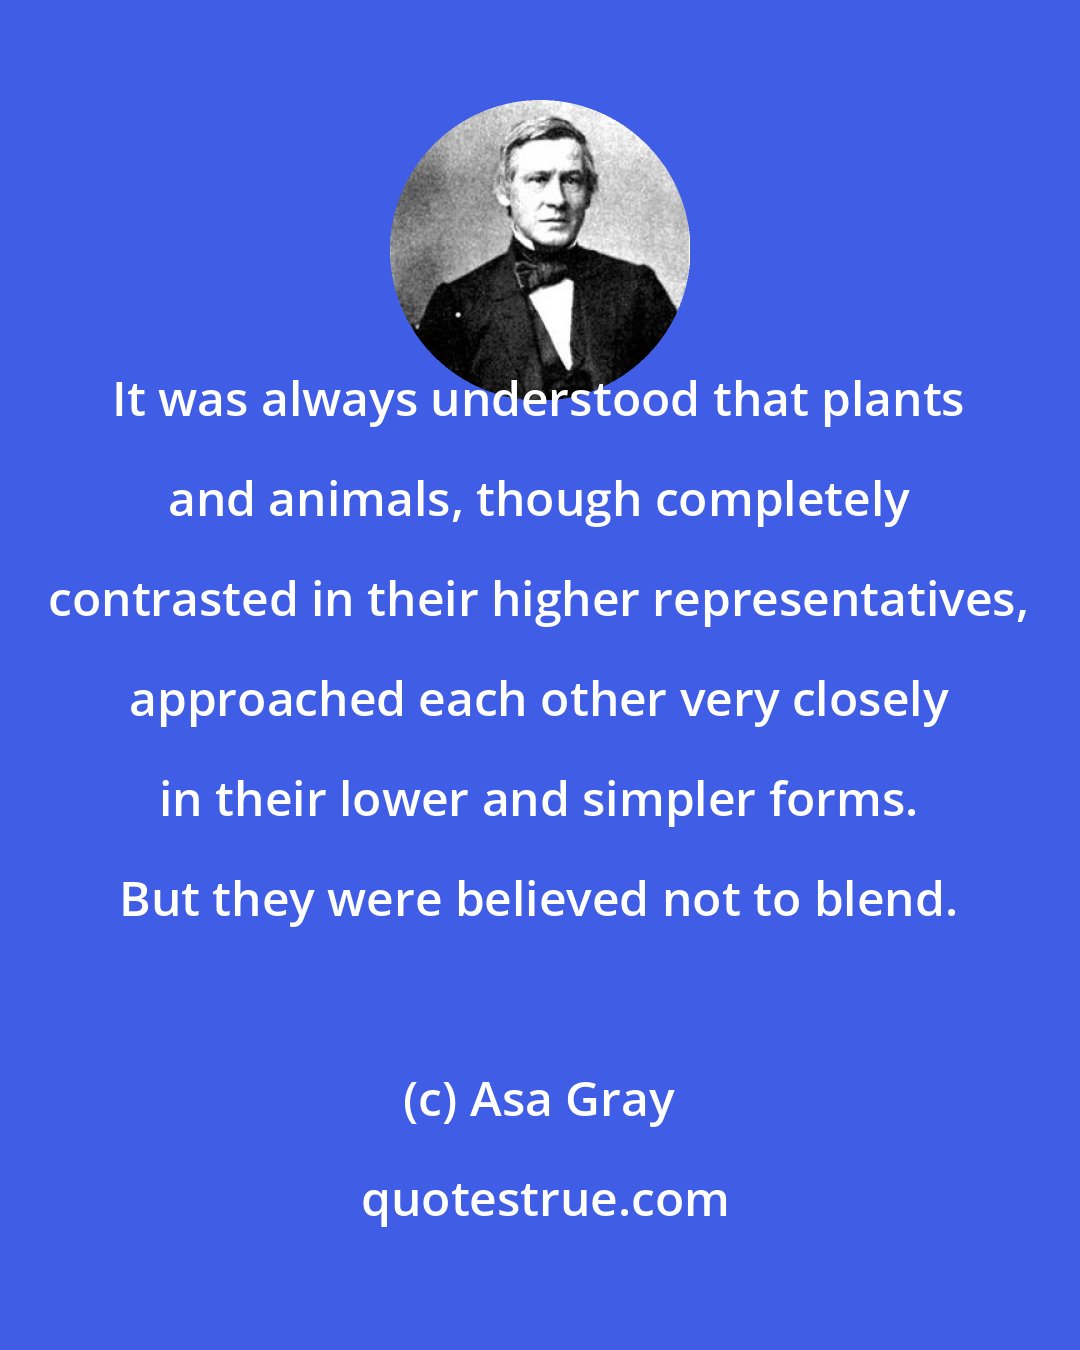 Asa Gray: It was always understood that plants and animals, though completely contrasted in their higher representatives, approached each other very closely in their lower and simpler forms. But they were believed not to blend.